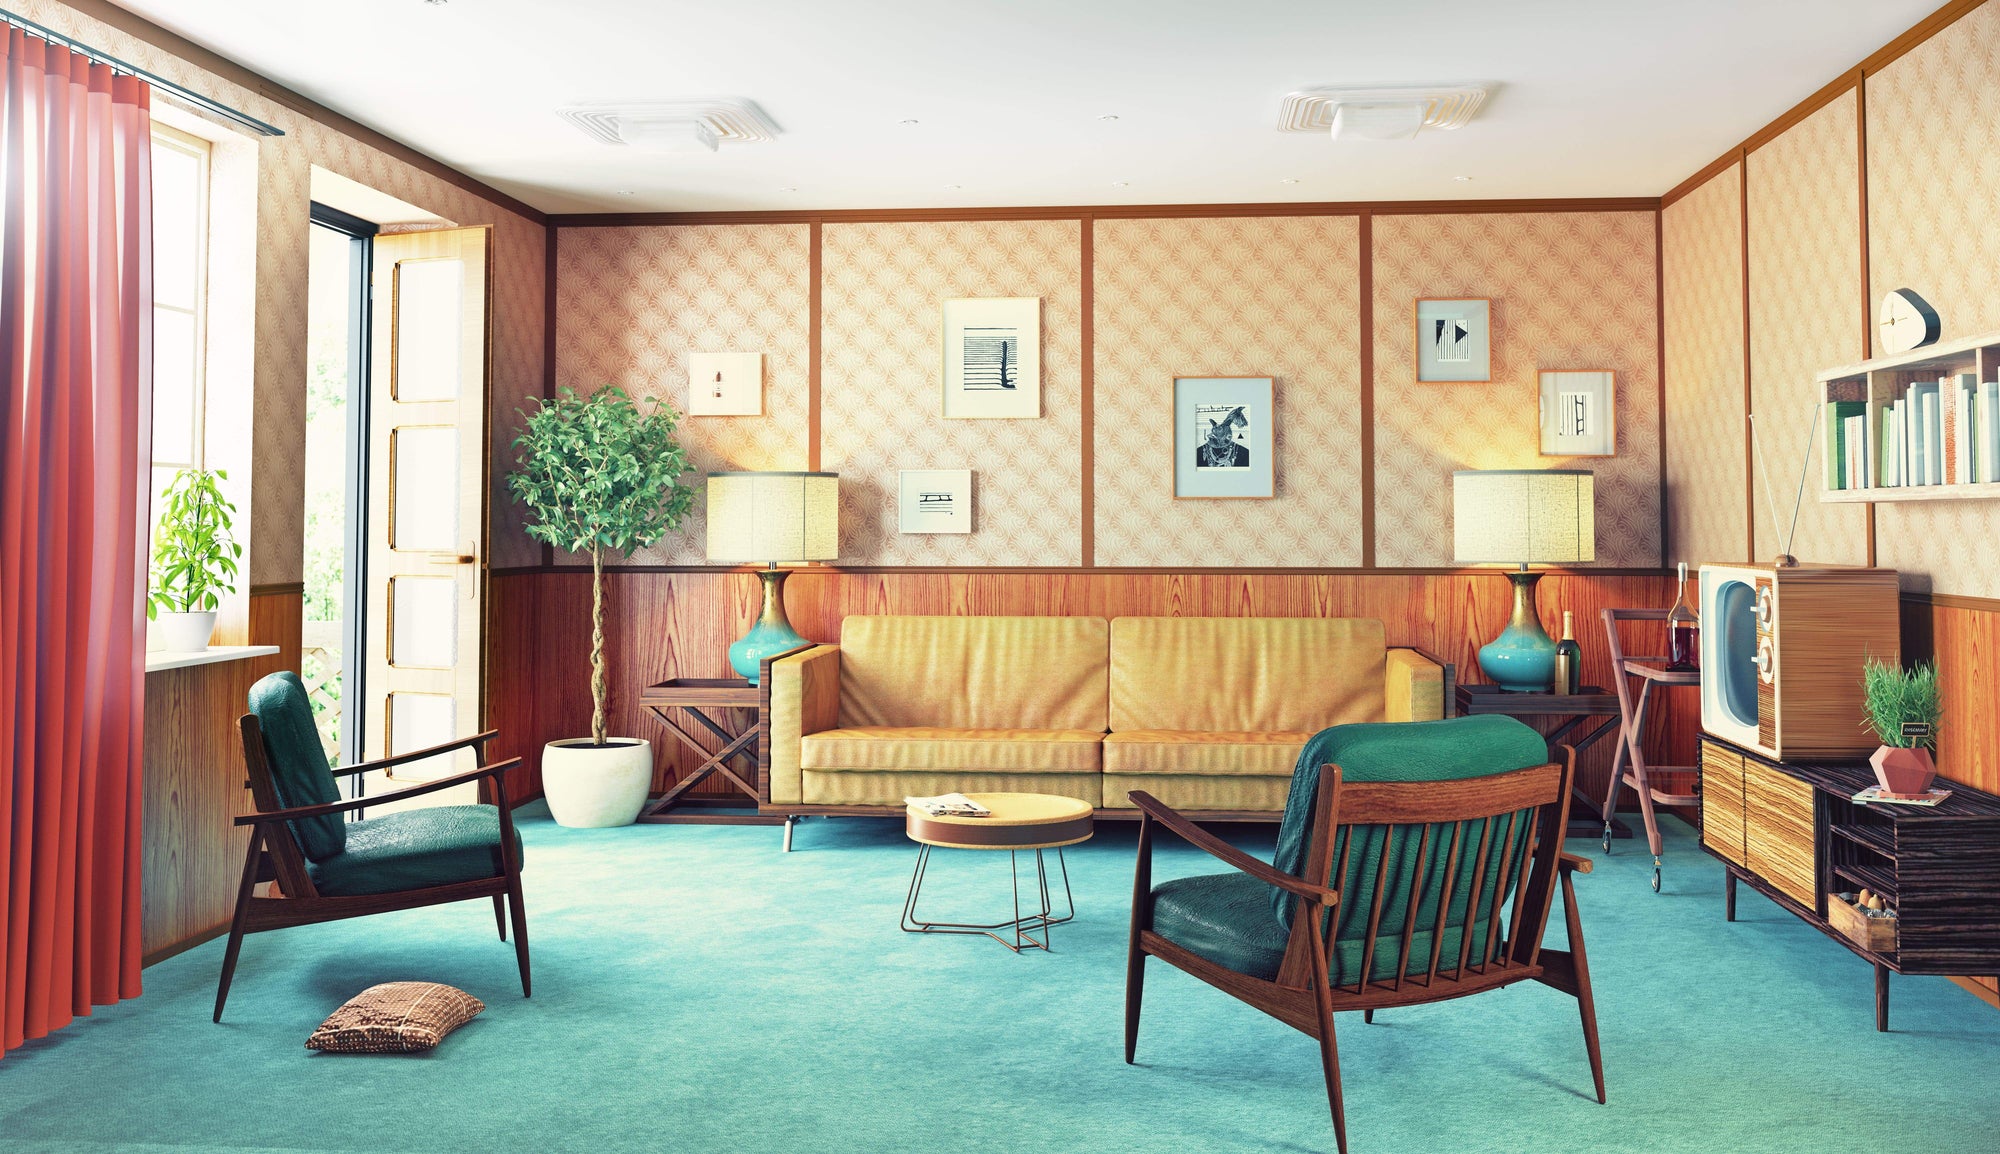 Relaxing Retro-Style: How to Decorate Your Living Room Like the '60s